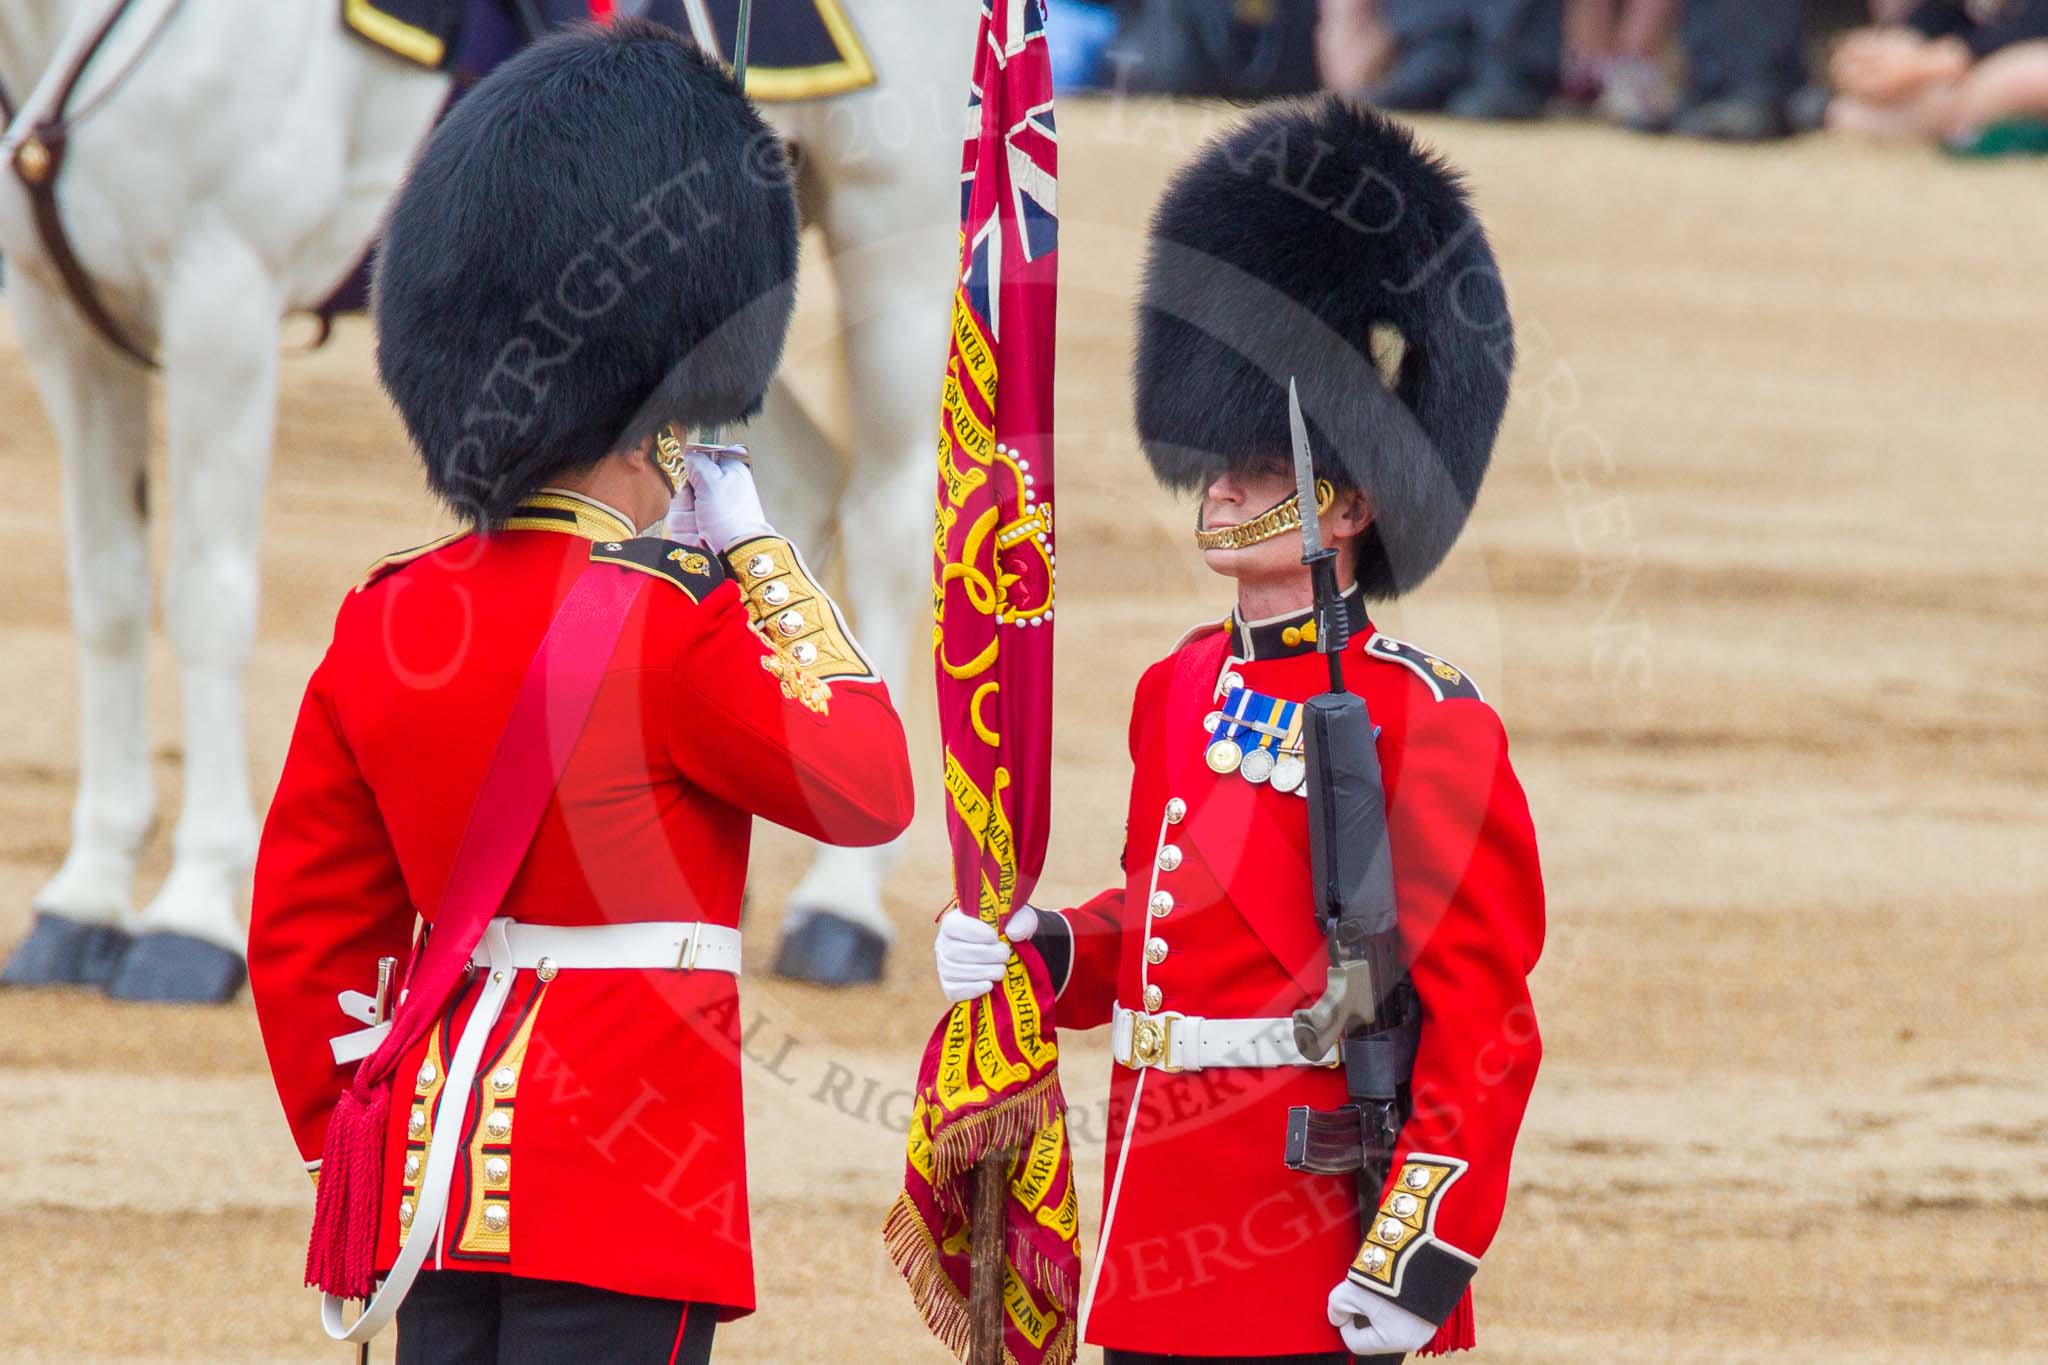 Trooping the Colour 2014.
Horse Guards Parade, Westminster,
London SW1A,

United Kingdom,
on 14 June 2014 at 11:21, image #525